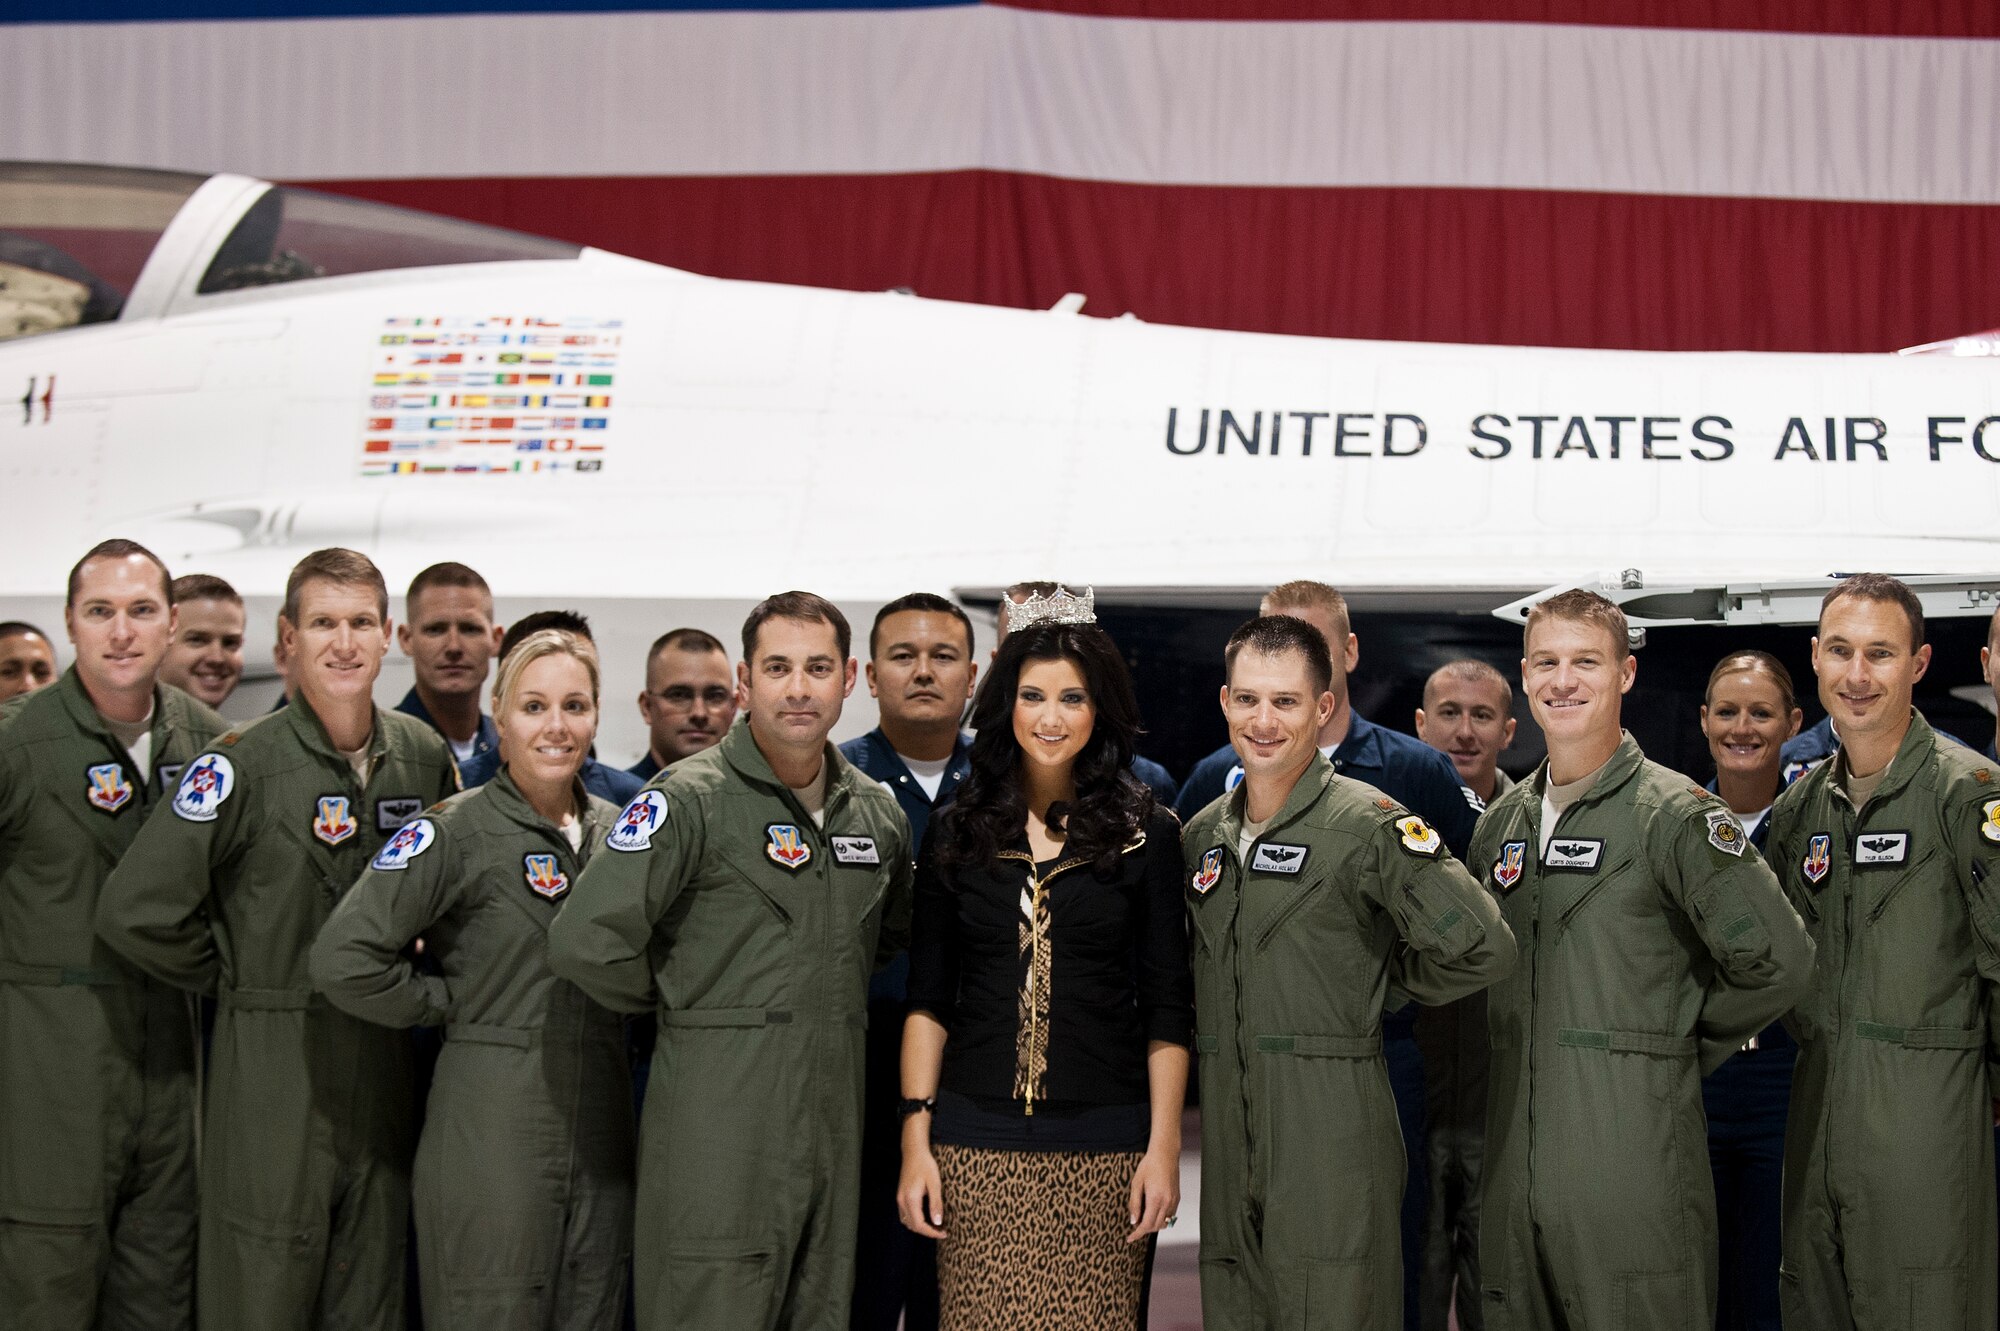 Laura Kaeppeler, Miss America 2012, poses with members of the United States Air Demonstration Squadron “Thunderbirds” during a visit to the Thunderbirds hangar, Jan. 8, 2013, at Nellis Air Force Base, Nev. Kaeppeler has worked closely with United Service Organizations, which is a nonprofit organization that provides programs, services and live entertainment to United States military and their families. (U.S. Air Force Photo by Airman 1st Class Jason Couillard)